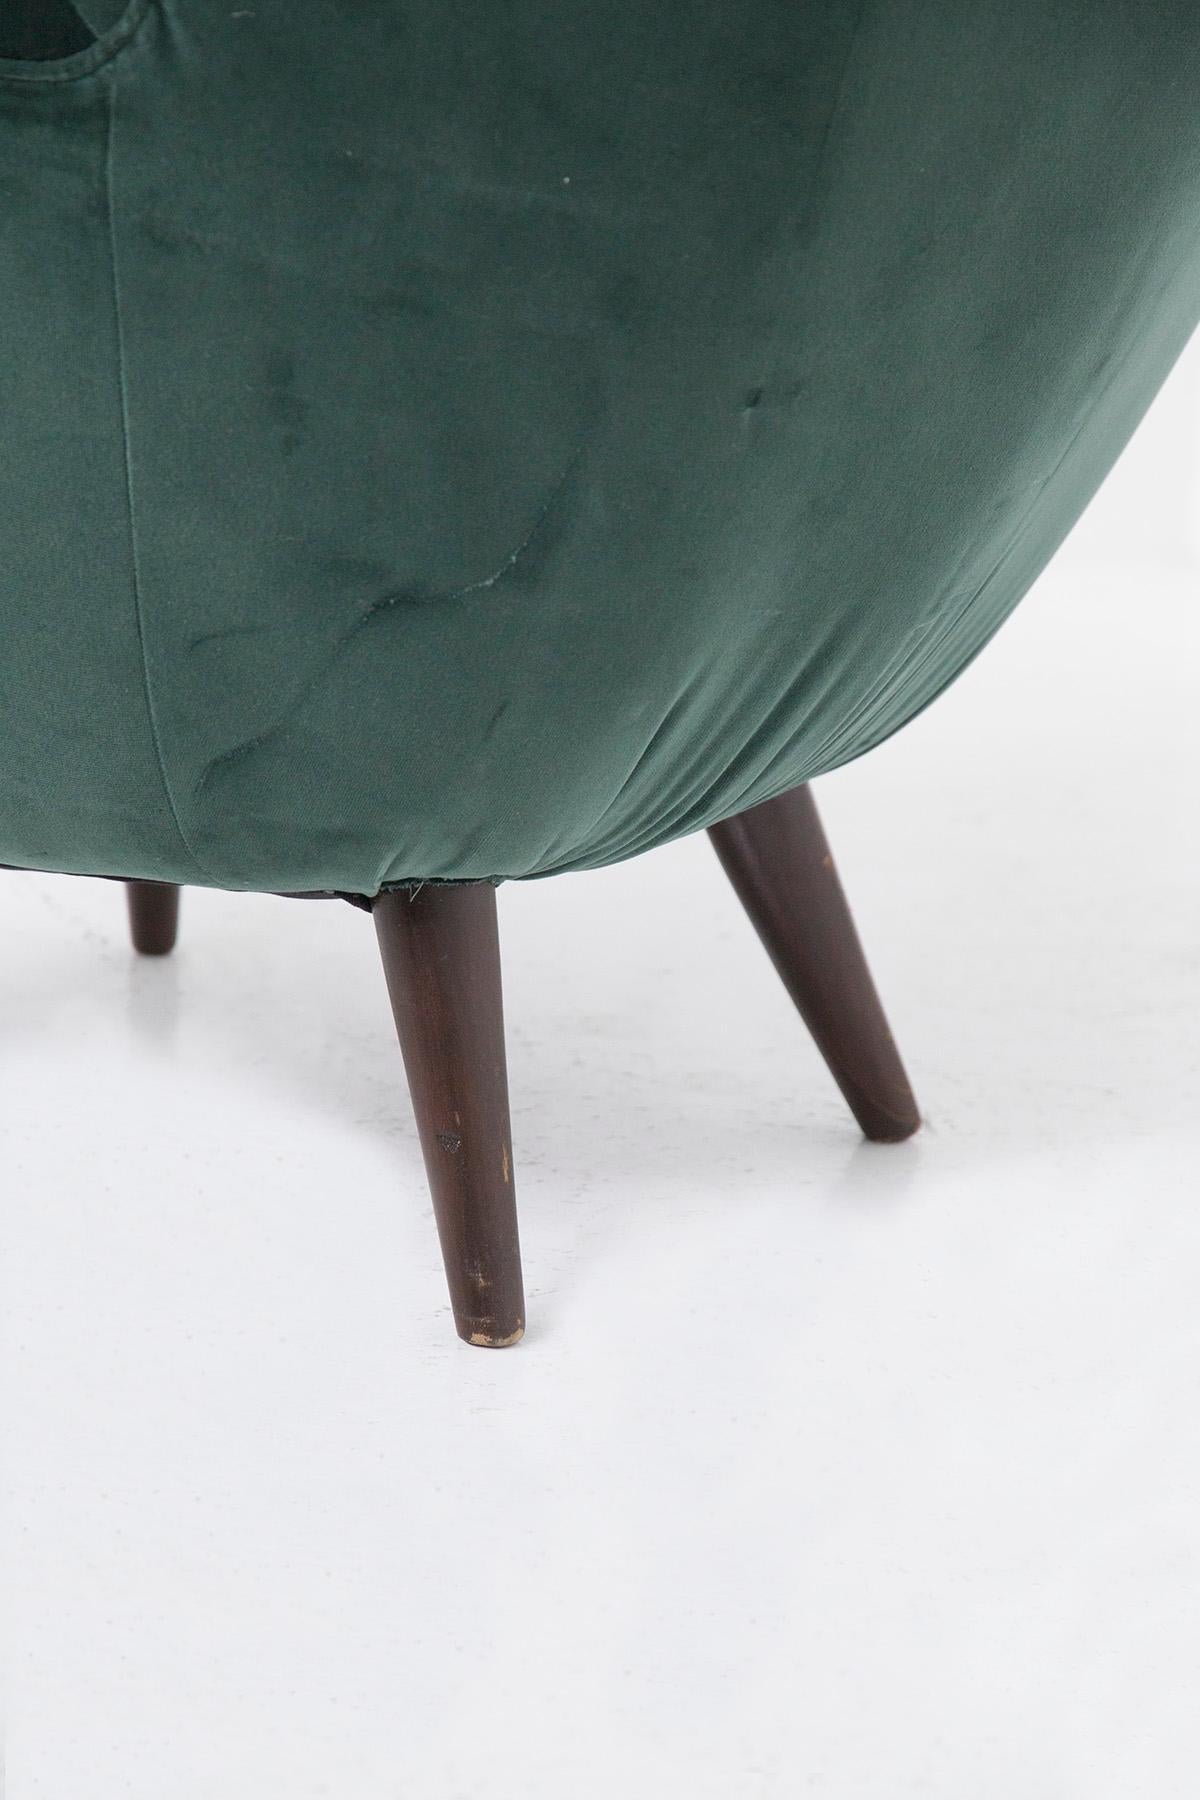 Italian Unique Extremely Rare Carlo Mollino Velvet Armchair, Published For Sale